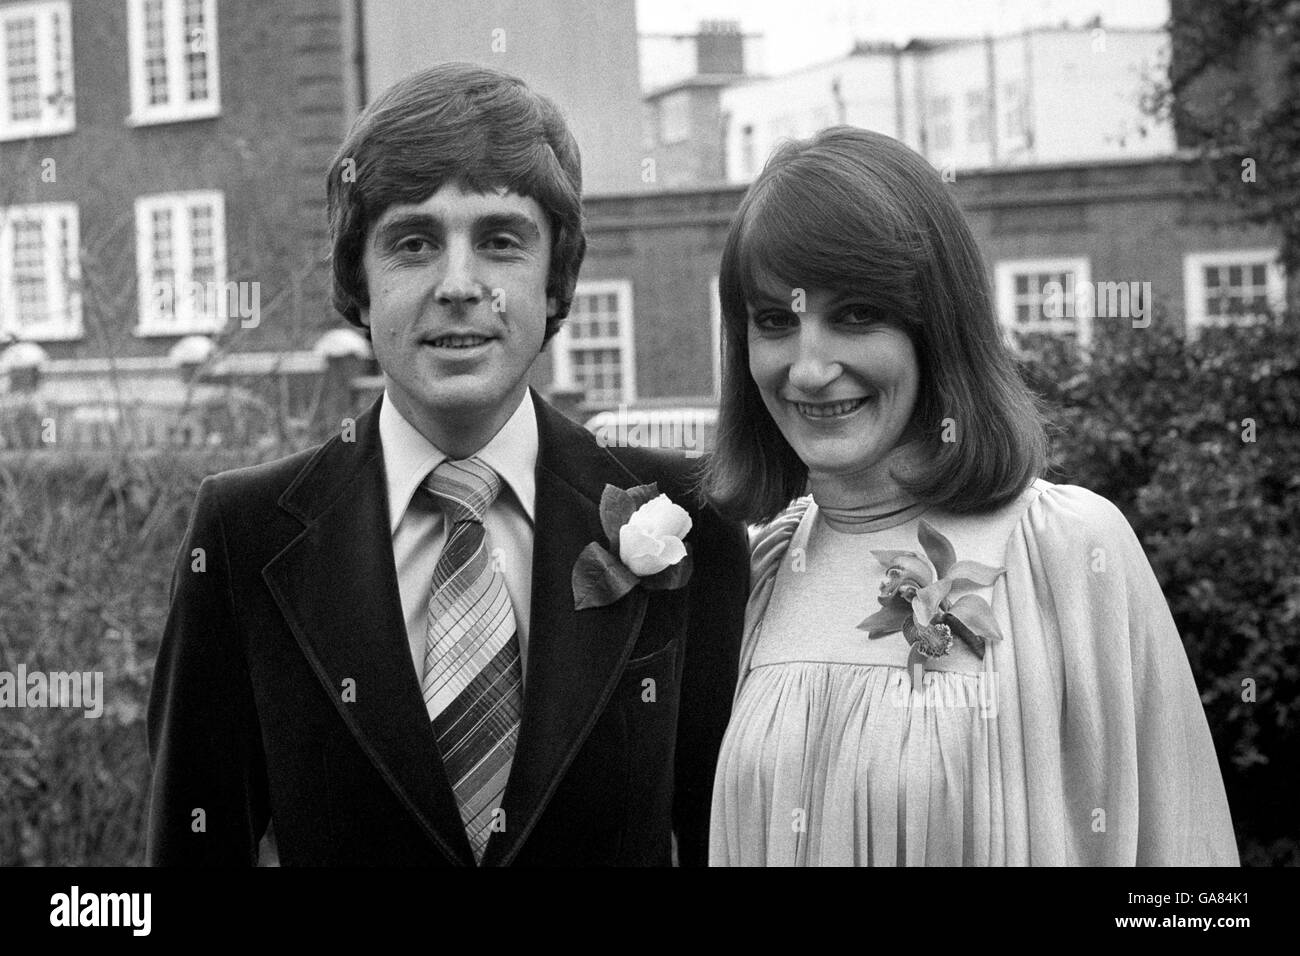 John Stapleton, one of the presenters of the BBC's "Nationwide" programme with his bride, 29 year old journalist Lynn Faulds Wood, after their wedding at Richmond Register Office. Stock Photo